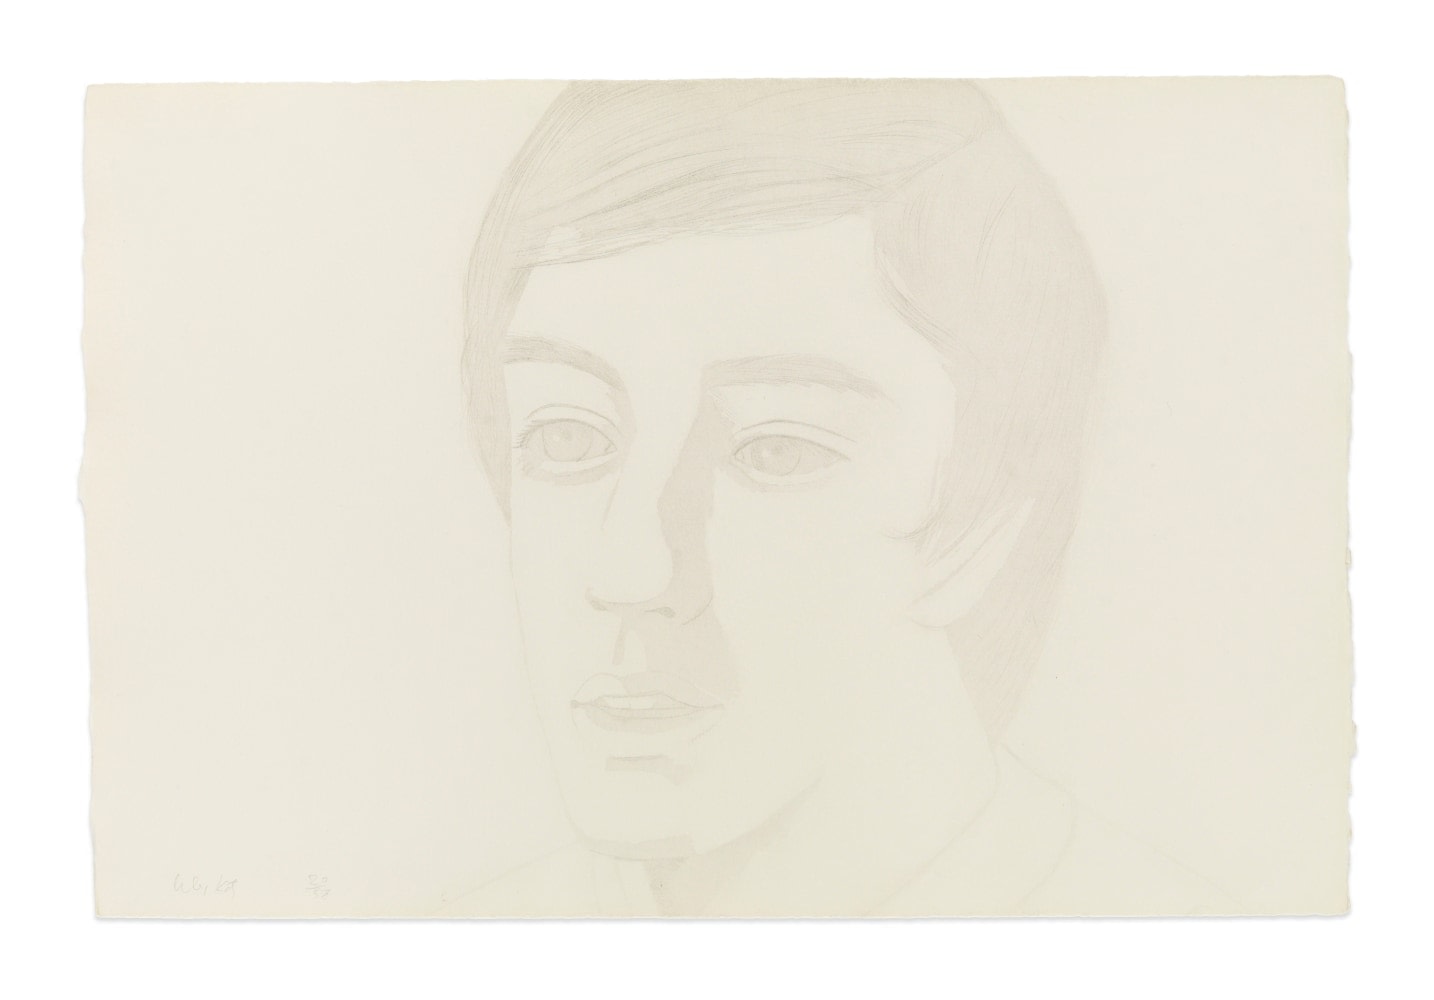 Vincent With Open Mouth, 1974

drypoint, edition of 58

15 x 22 1/4 in. / 38.1 x 56.1 cm